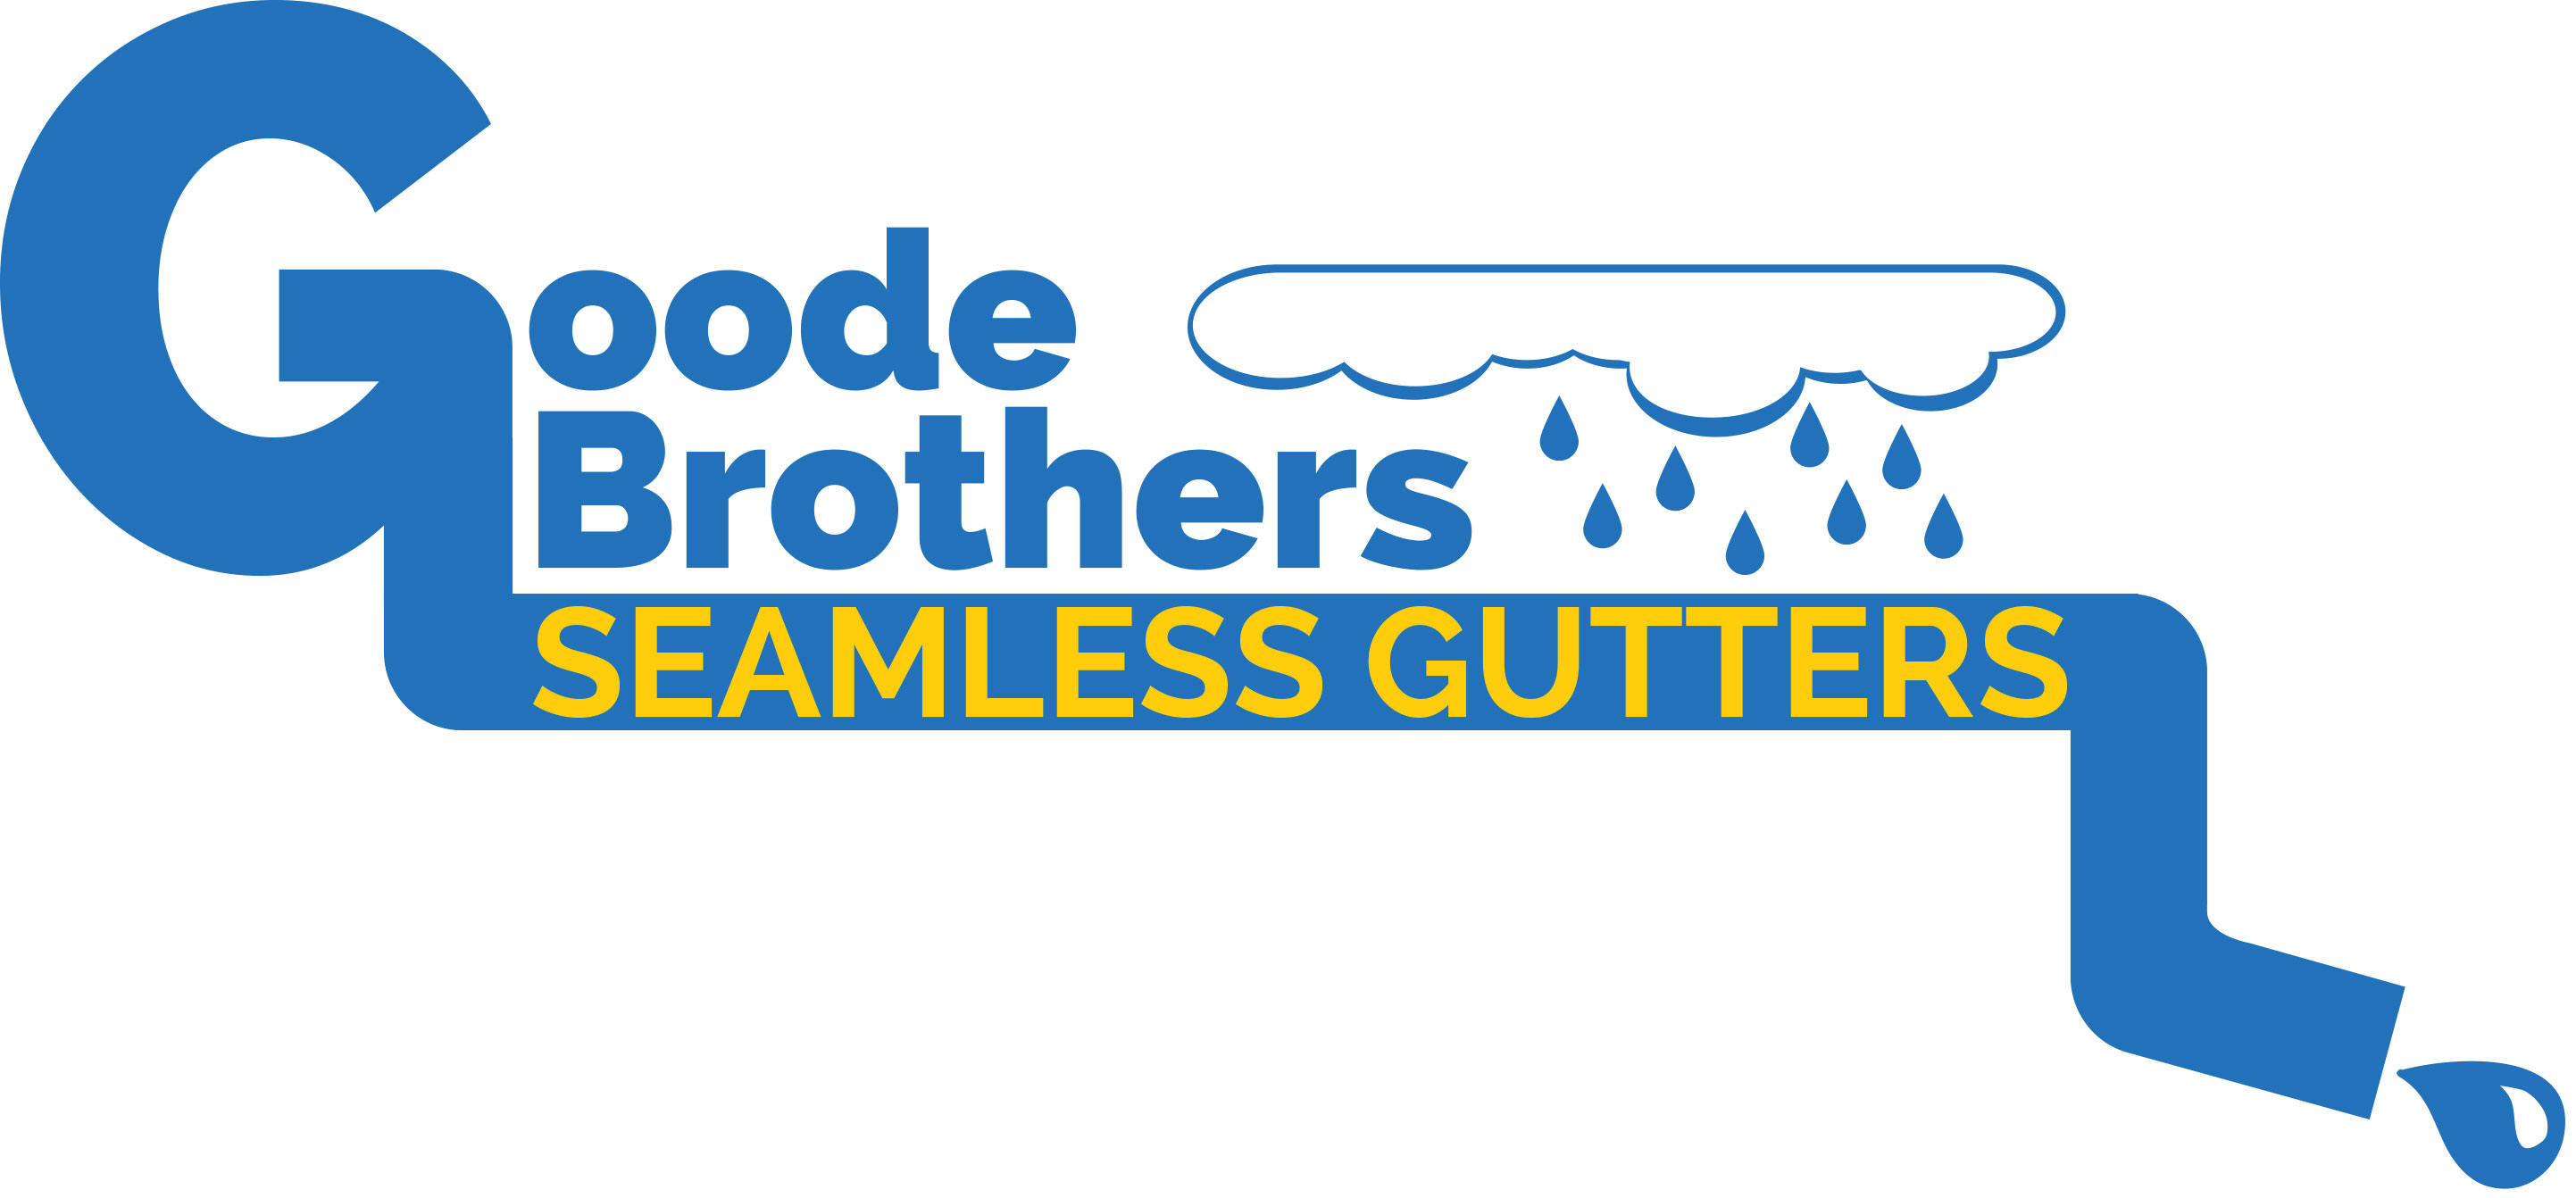 Goode Brothers Seamless Gutters Logo